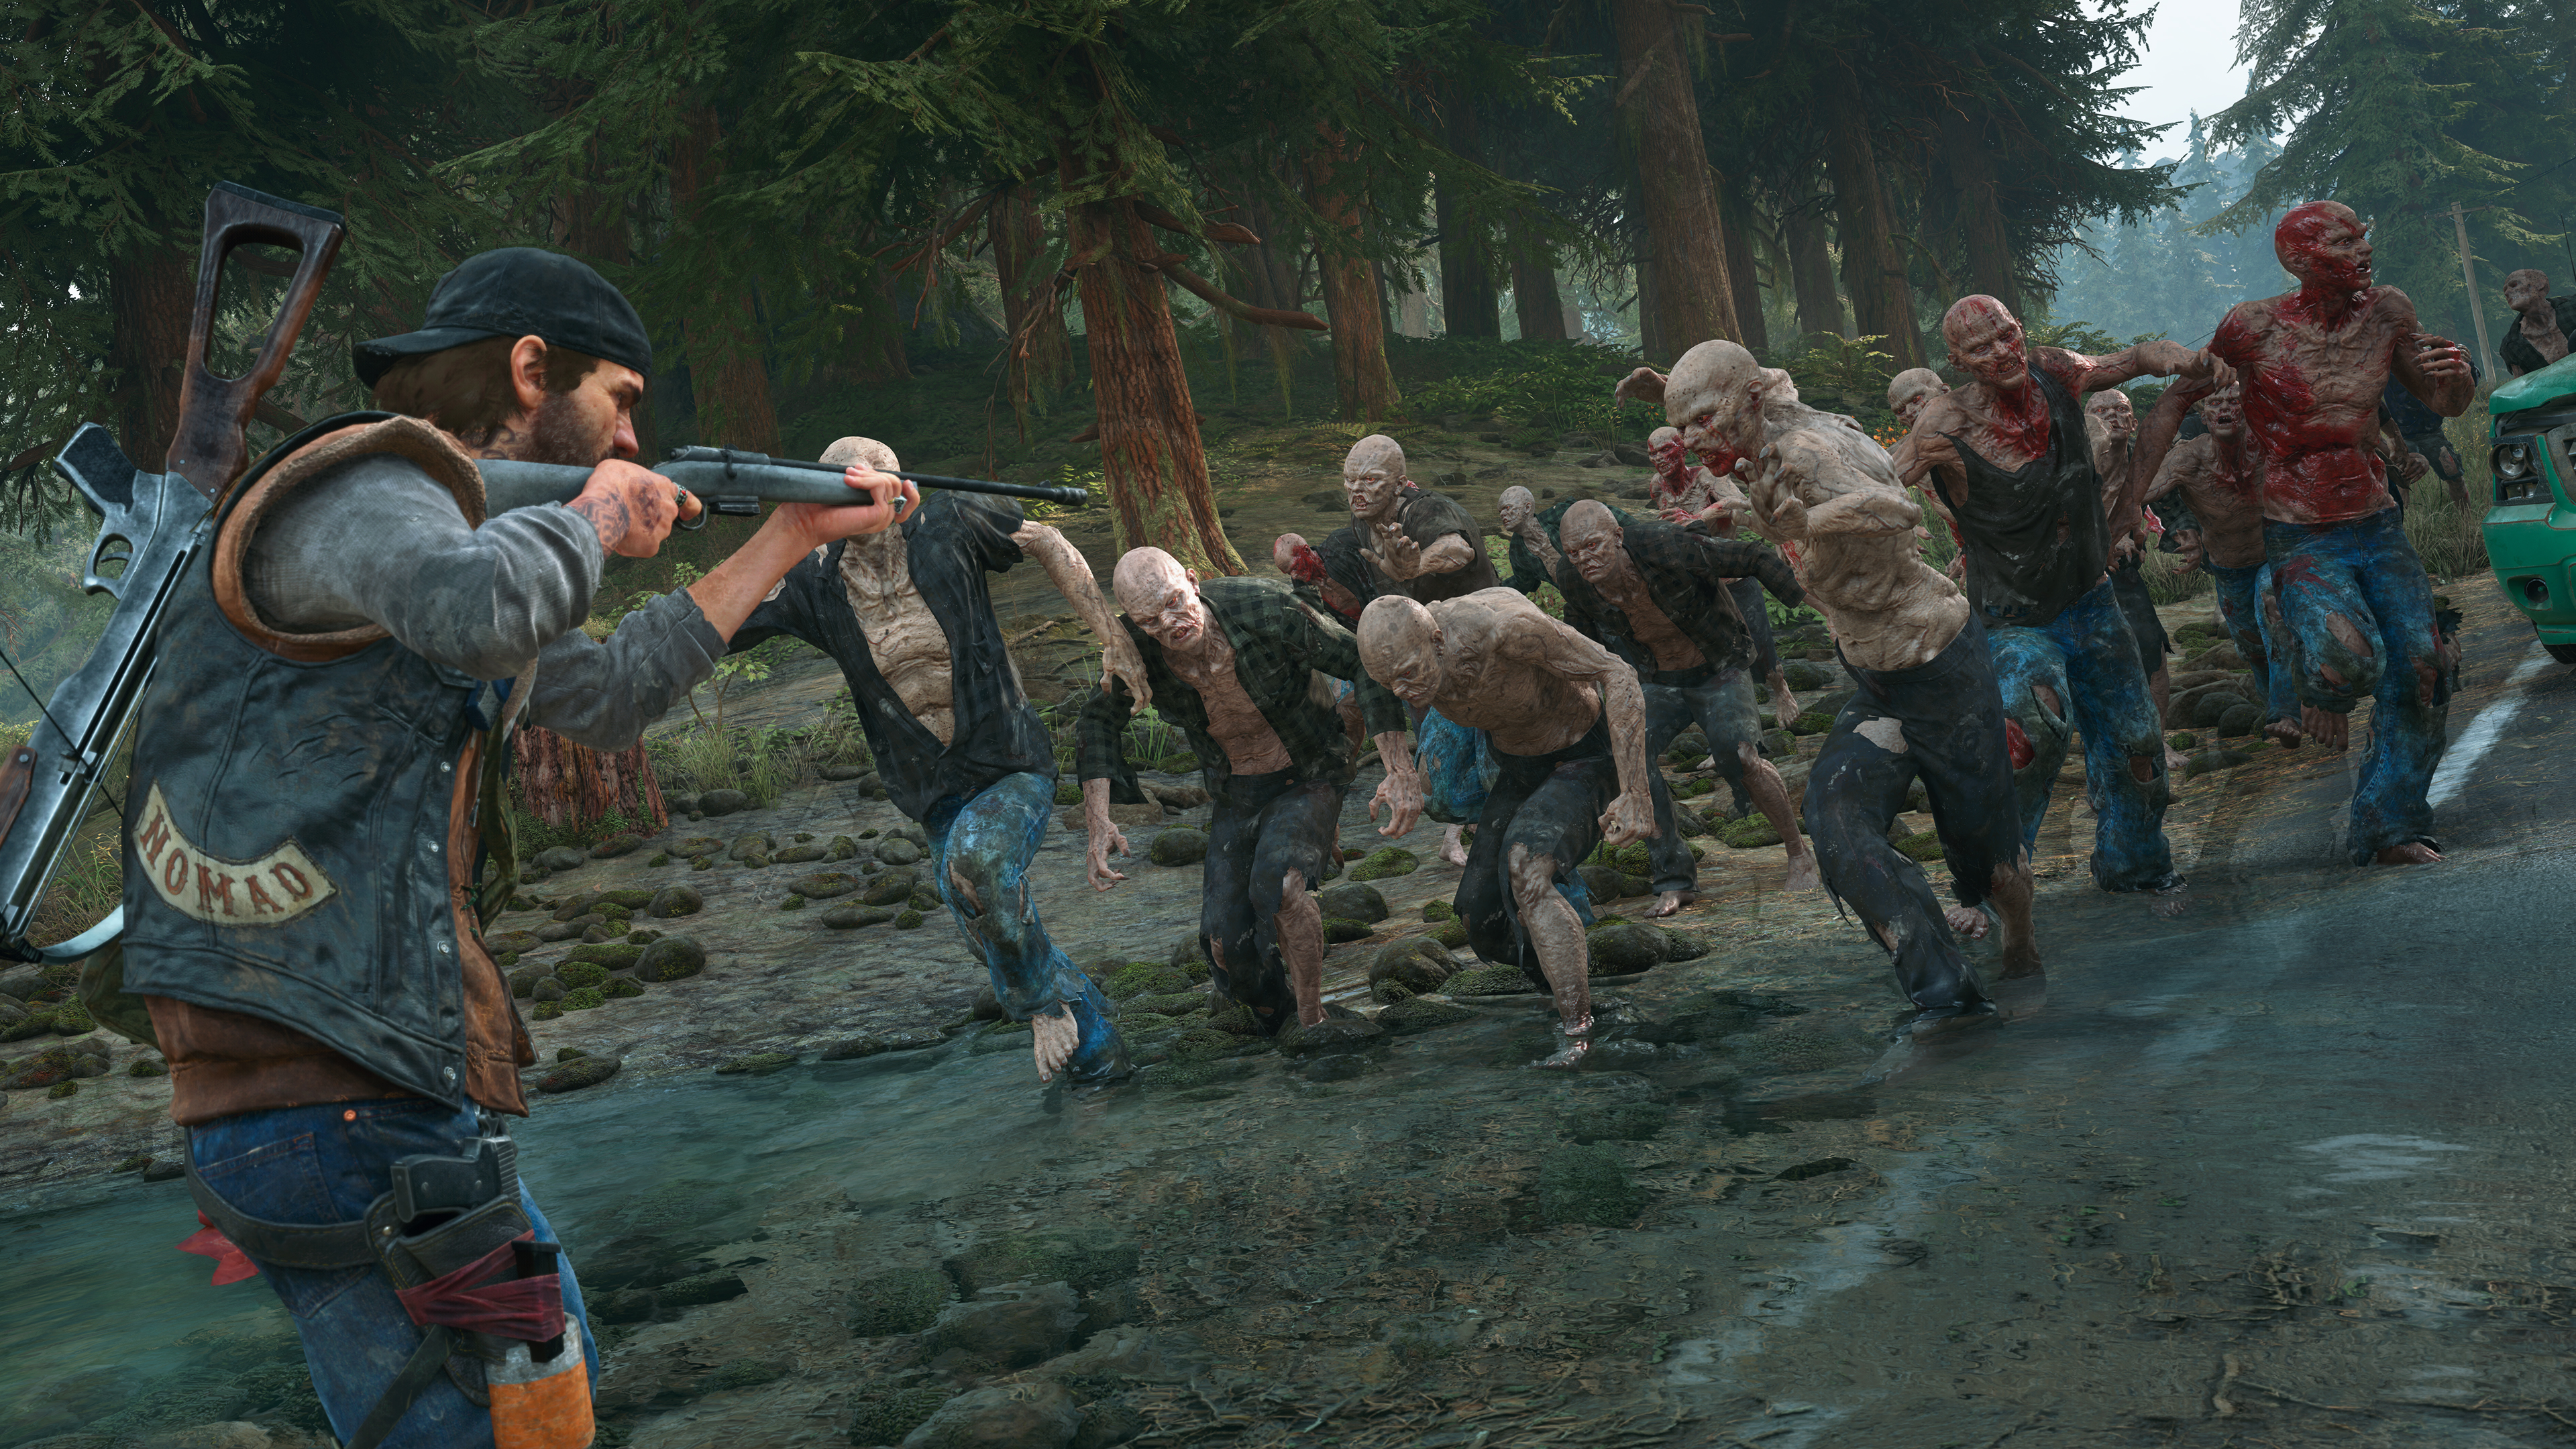 A screenshot from the game Days Gone